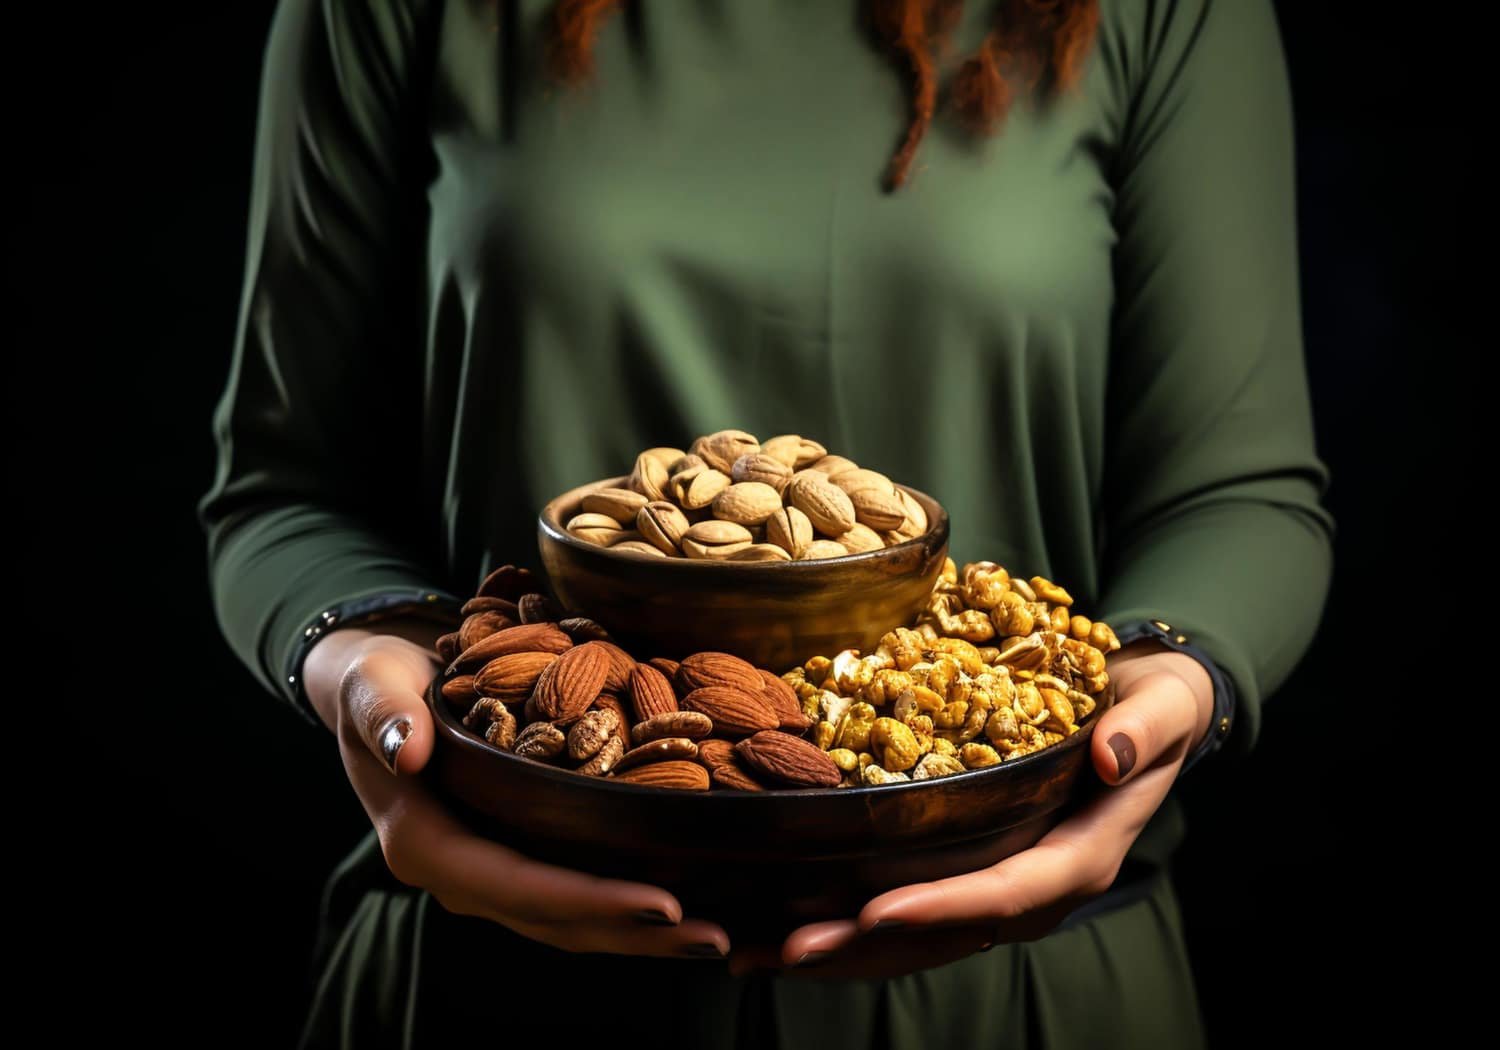 You are currently viewing Nuts.com: Discover the World Through Delicious Snacks